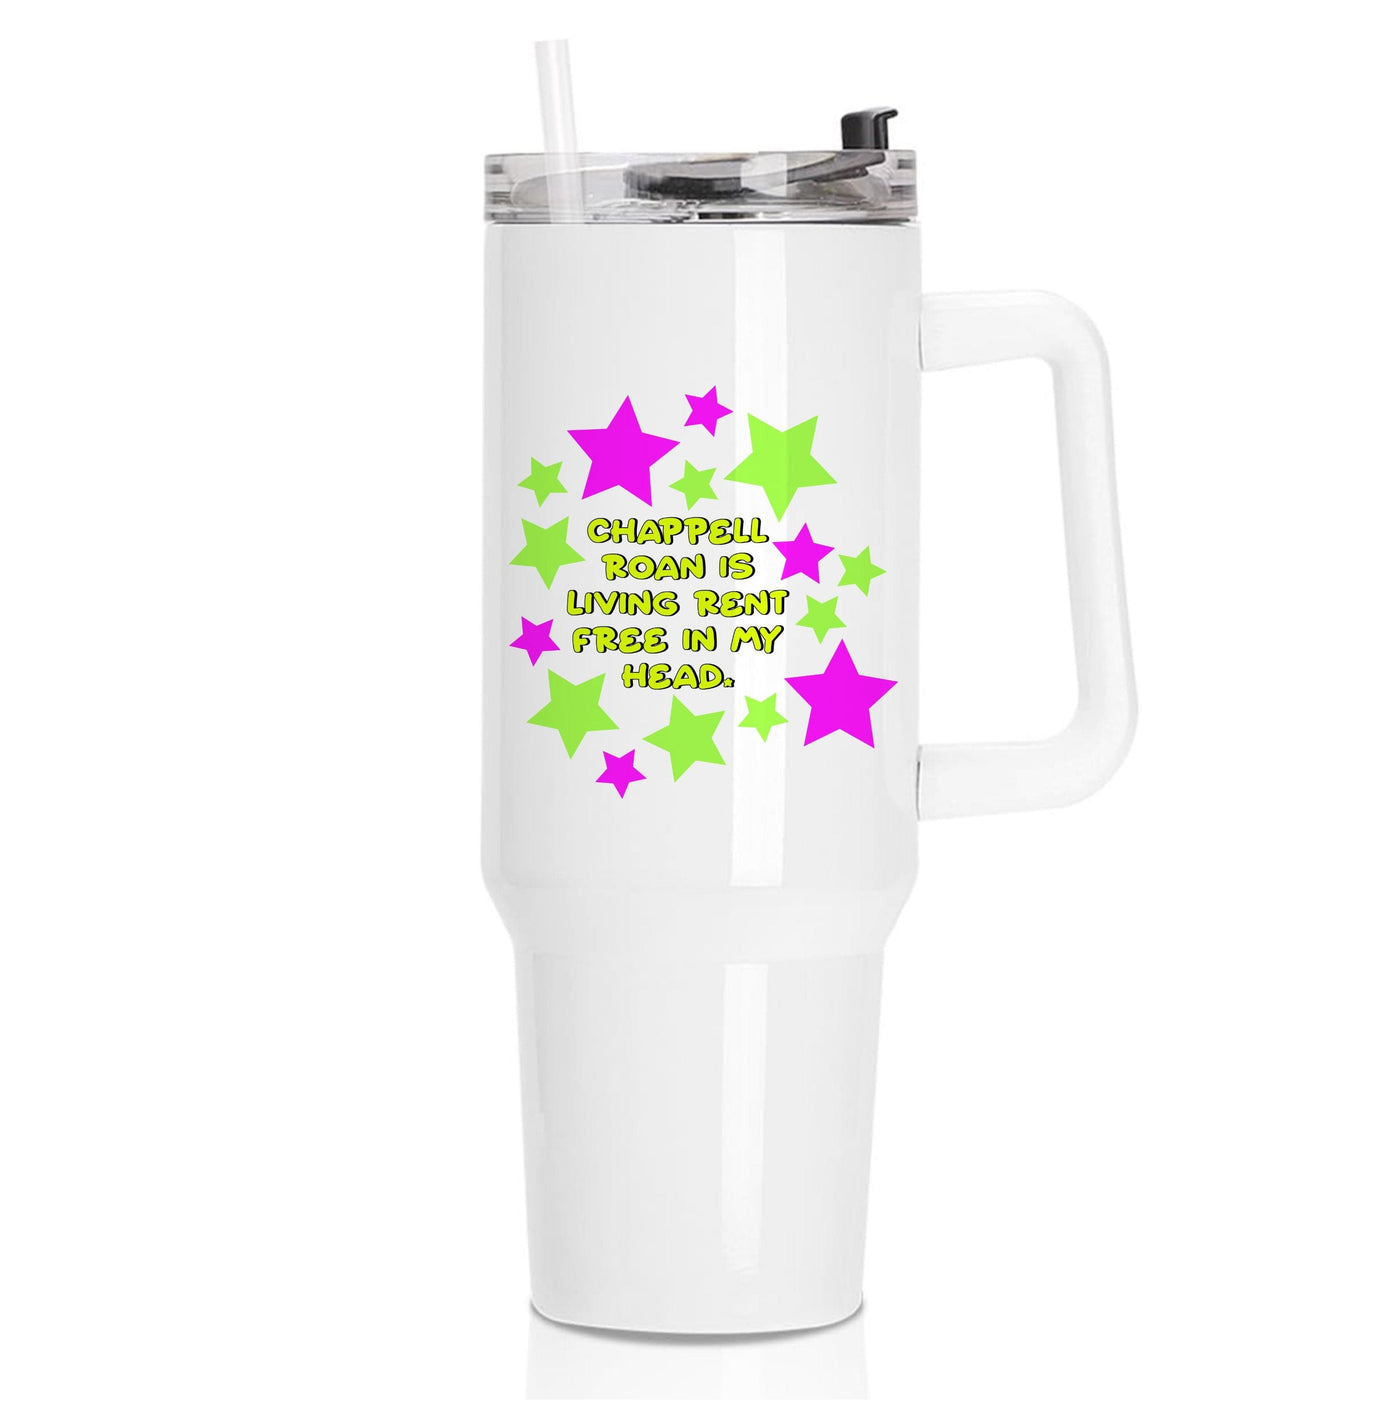 Chappell Roan Rent Free In My Head Tumbler